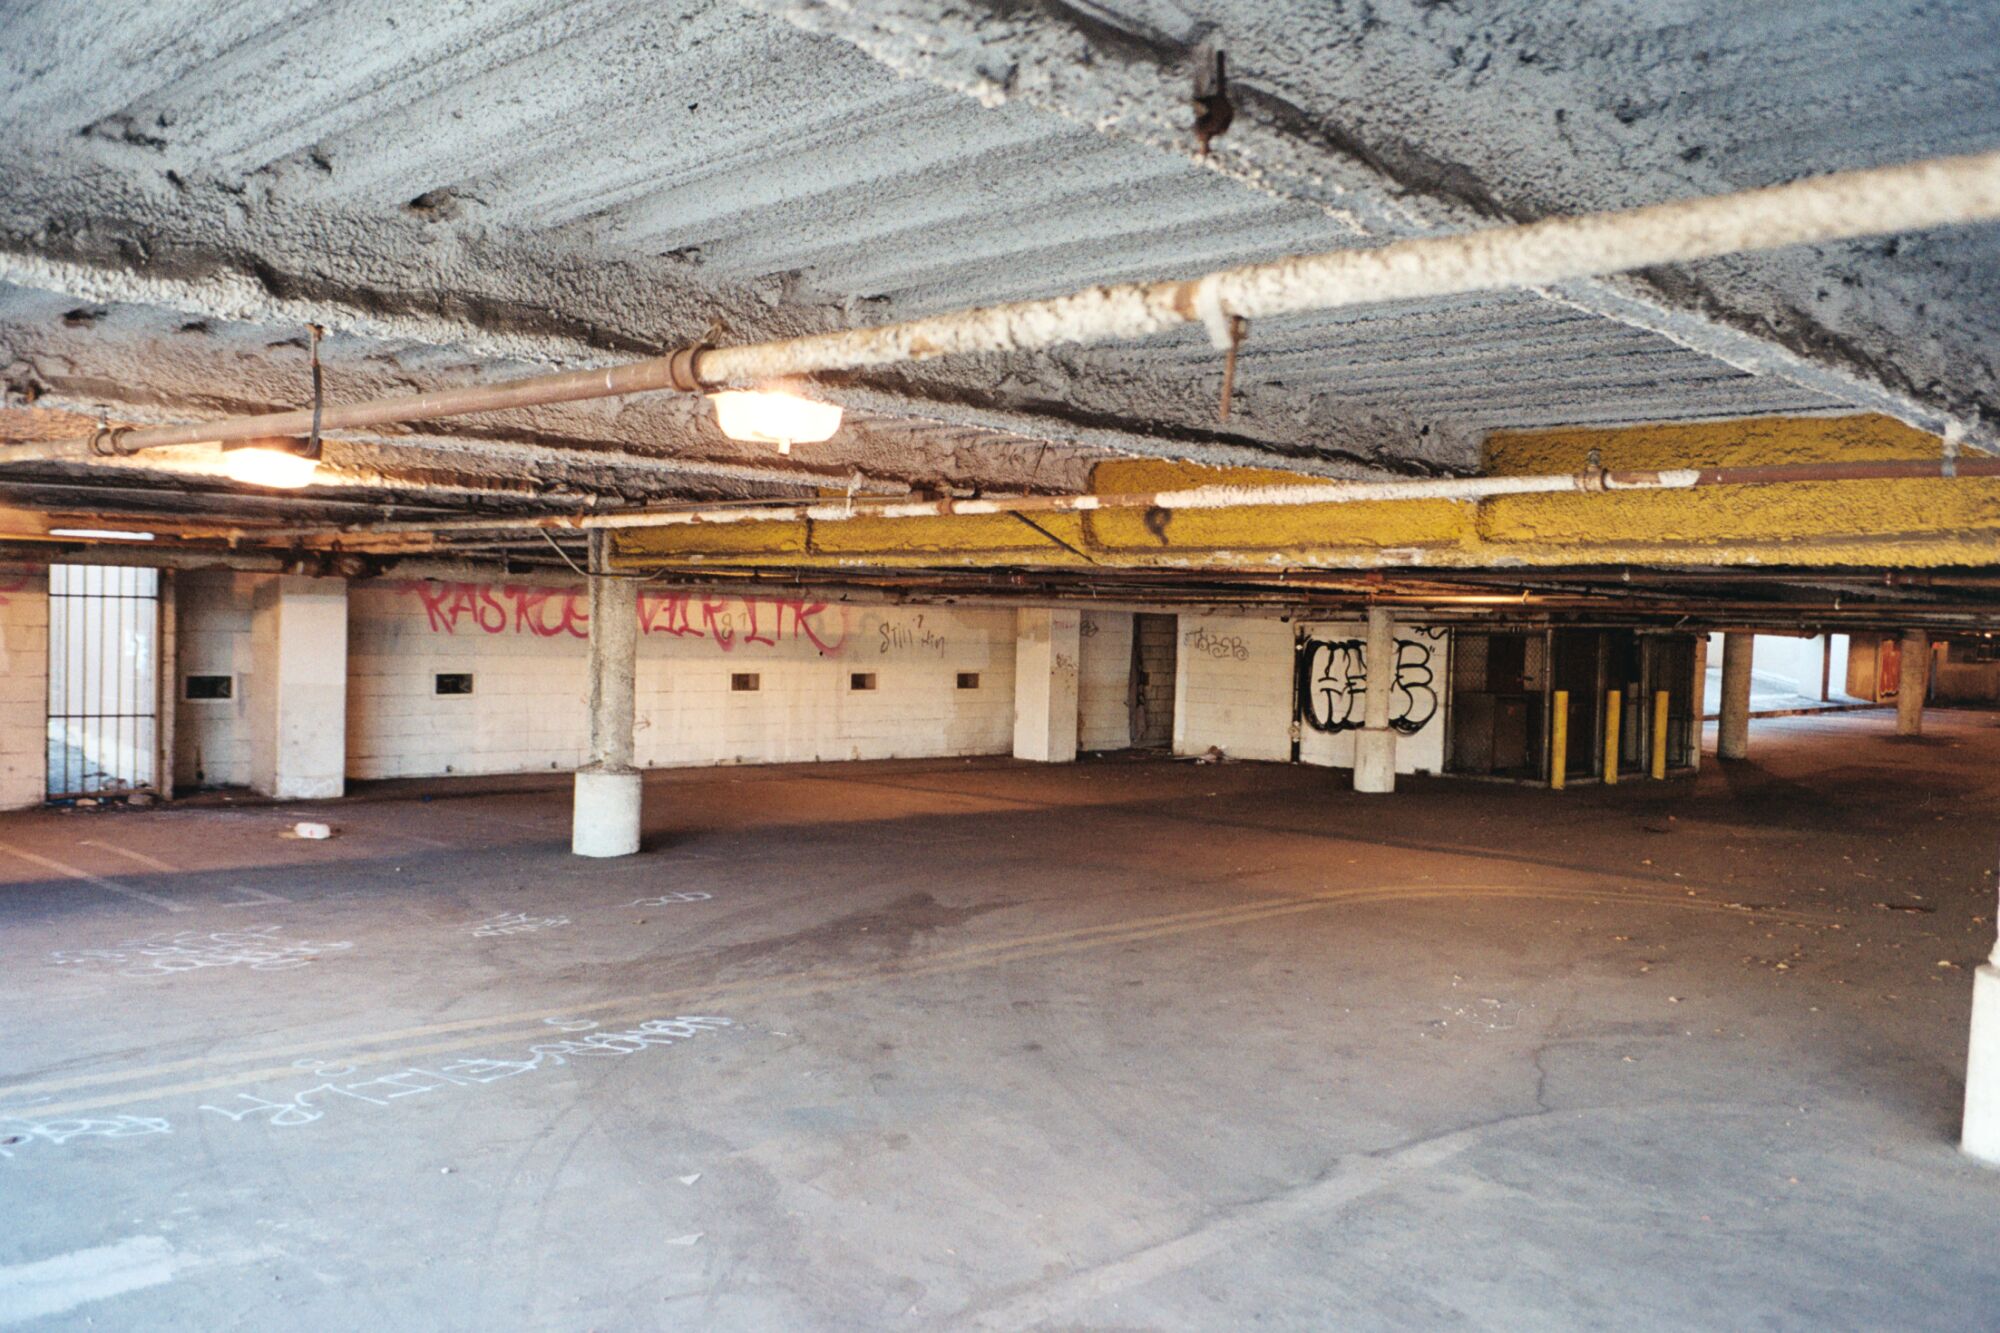 The inside of an empty parking garage with graffiti on the walls